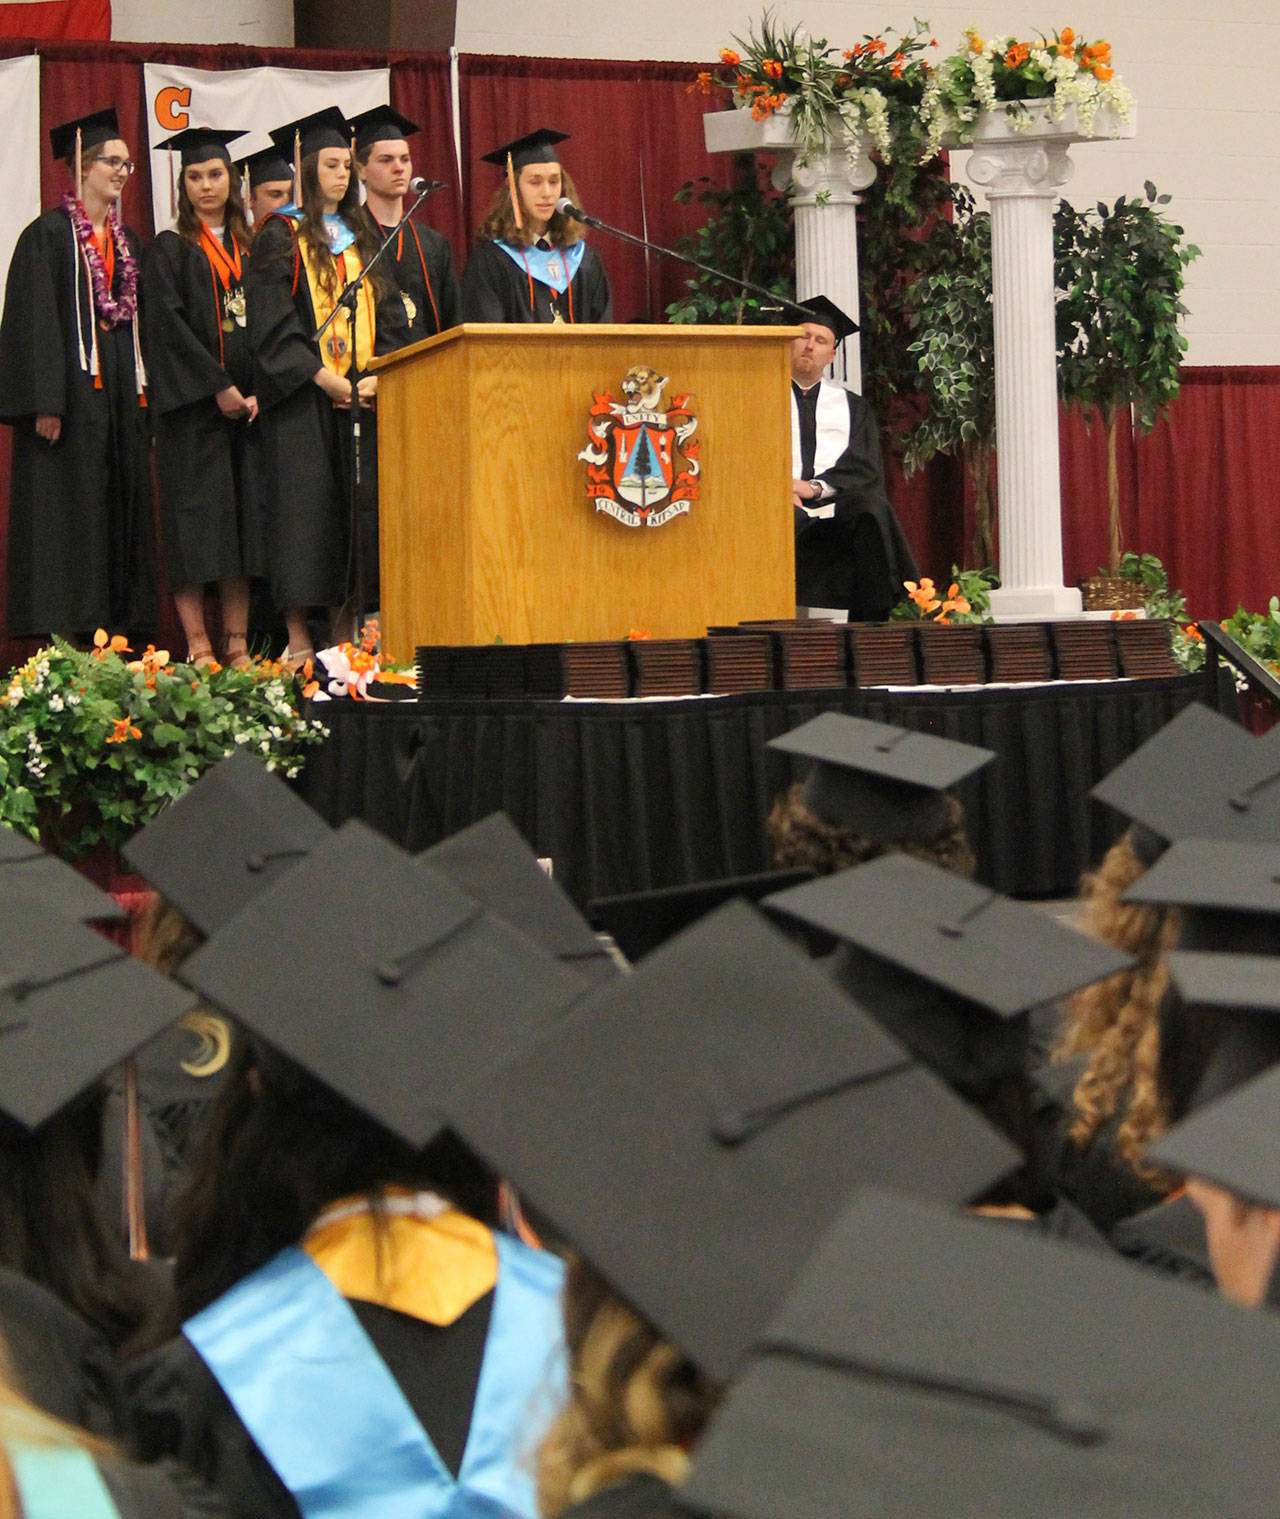 The six salutatorians offered greetings and introductions.                                Terryl Asla| Kitsap News Group